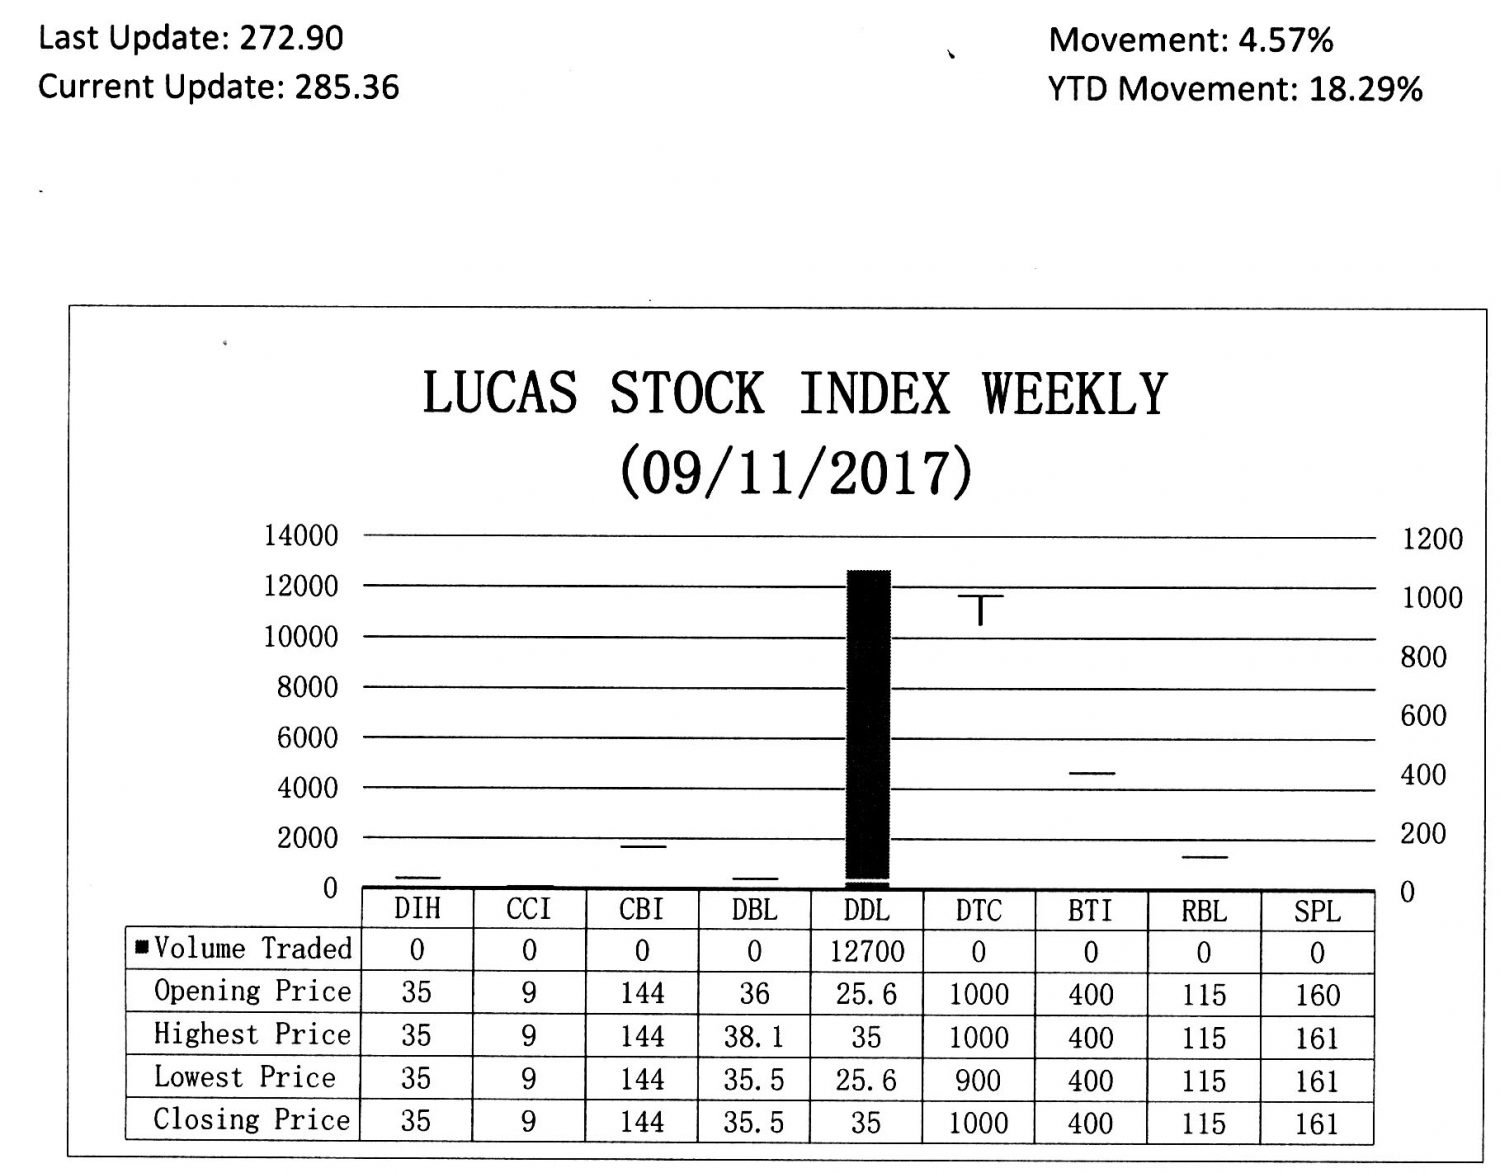 LUCAS STOCK INDEX

The Lucas Stock Index (LSI) rose by 4.57 per cent during the second period of trading in September 2017. The stocks of one company were traded with 12,700 shares changing hands. It was a Climber. The stocks of the Demerara Distillers Limited (DDL) increased 36.72 per cent on the sale of the 12,700 shares. 

